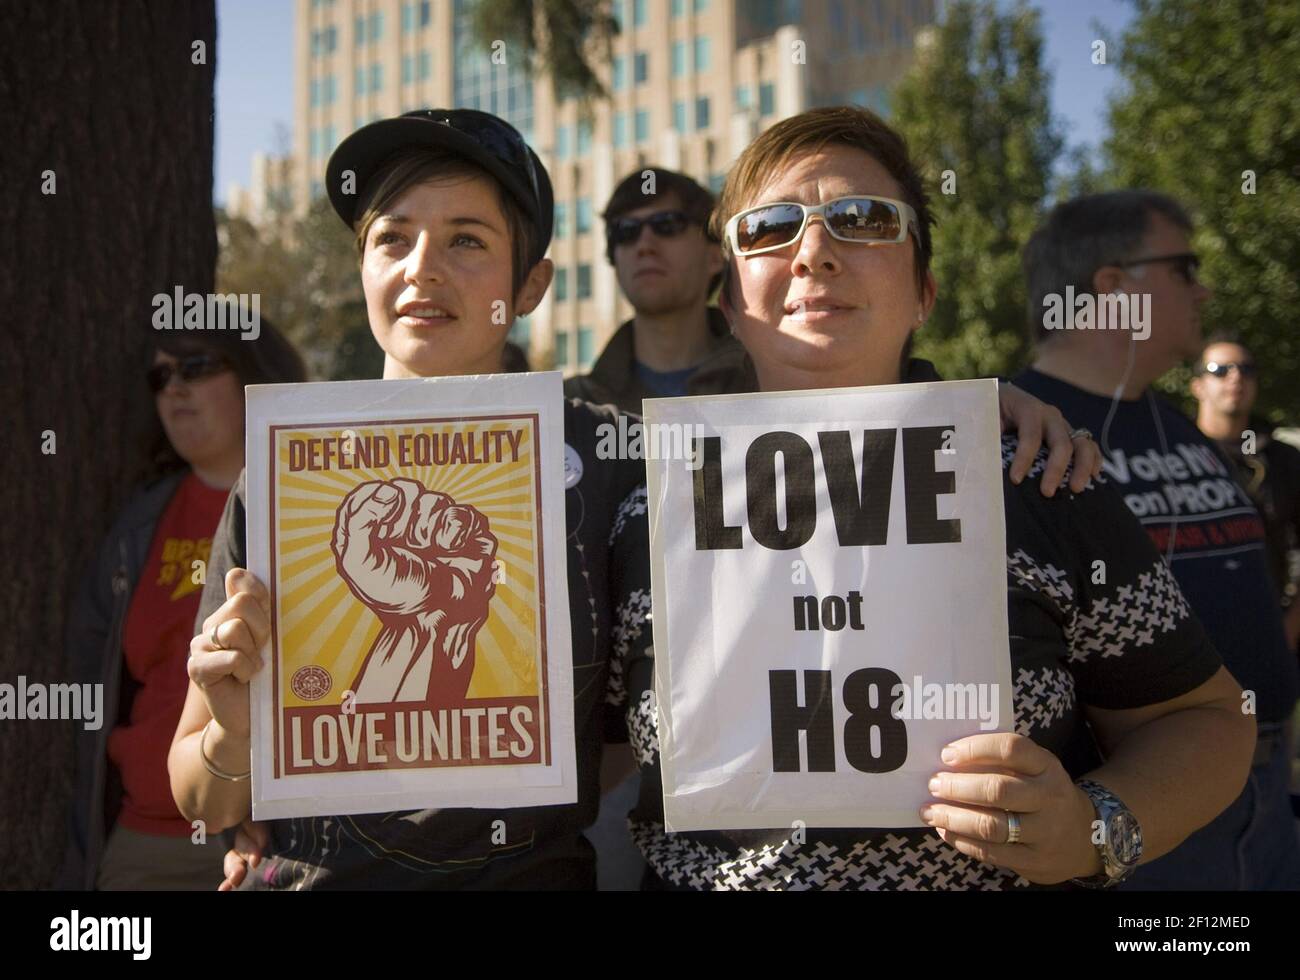 Kelly McAllister, left, and her wife, Marci Burba, both of Sacramento, attend a gay rights rally protesting the passage of California's Proposition 8 at Cesar Chavez park on Saturday, November 13, 2008, in Sacramento, California. (Photo by Autumn Cruz/Sacramento Bee/MCT/Sipa USA) Stock Photo